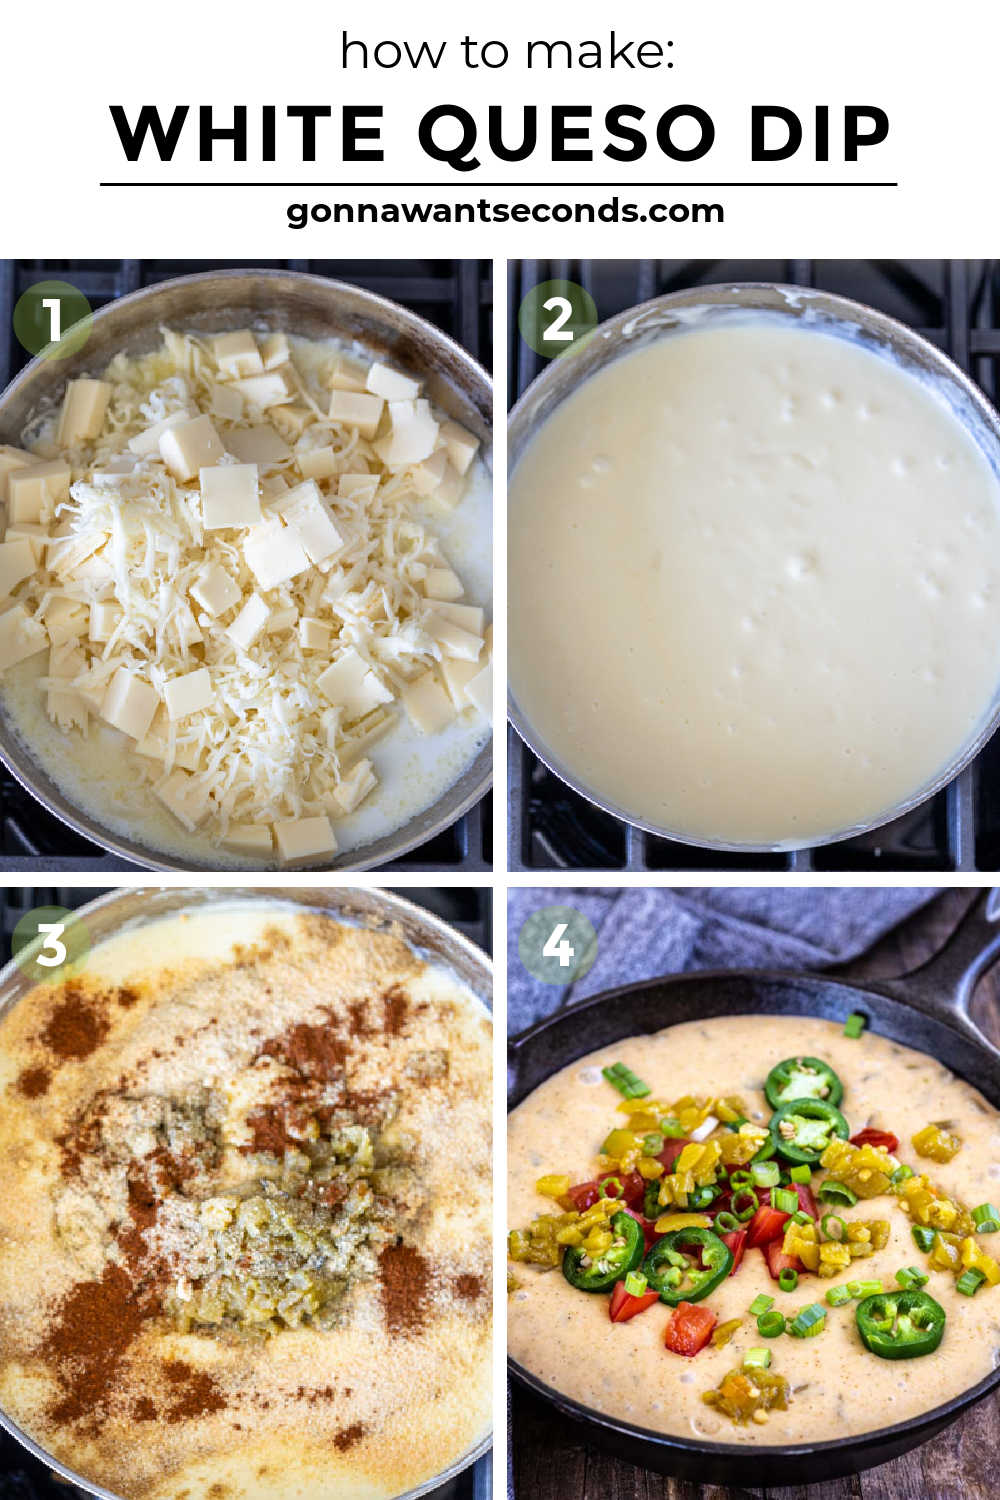 Step by step how to make white Queso dip